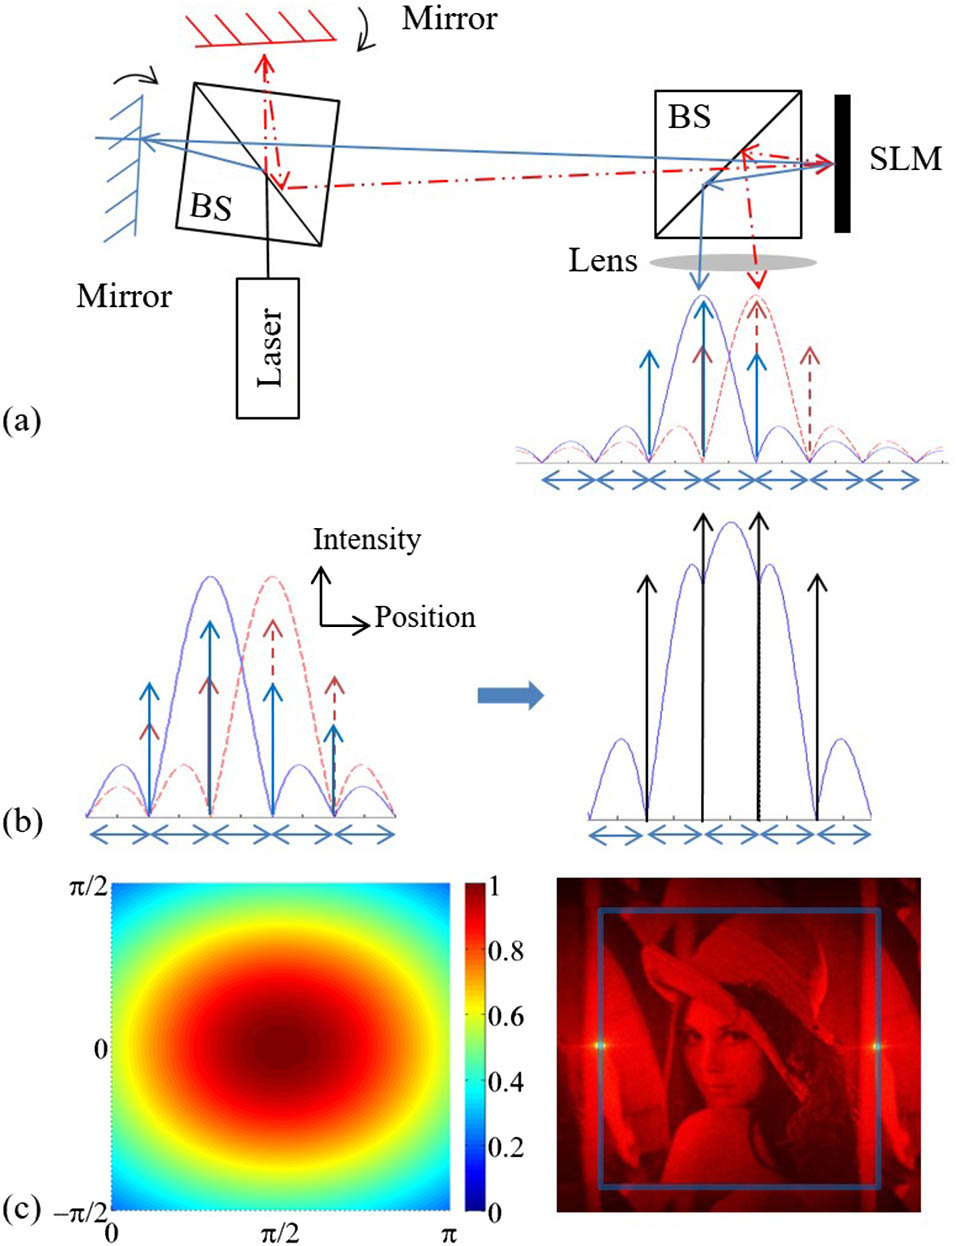 (Color online) (a) Optics setup illustration. Two laser beams, split from the same beam by a beam splitter (BS), are colored with red dashed lines and blue straight lines. The 1D cross section intensity profile is also illustrated underneath; (b) left, the matching of two 1D cross section intensity profiles; right, the intensity profile after overlapping two profiles, while the black arrows mean the bright spots; (c) left, the intensity 2D distribution of the image region; right, the physical reconstructed Lenna image with the outline square box corresponding to the area of the intensity distribution on the left. The reconstruction applies multiple frames with random phase to reduce the speckle noise[13].